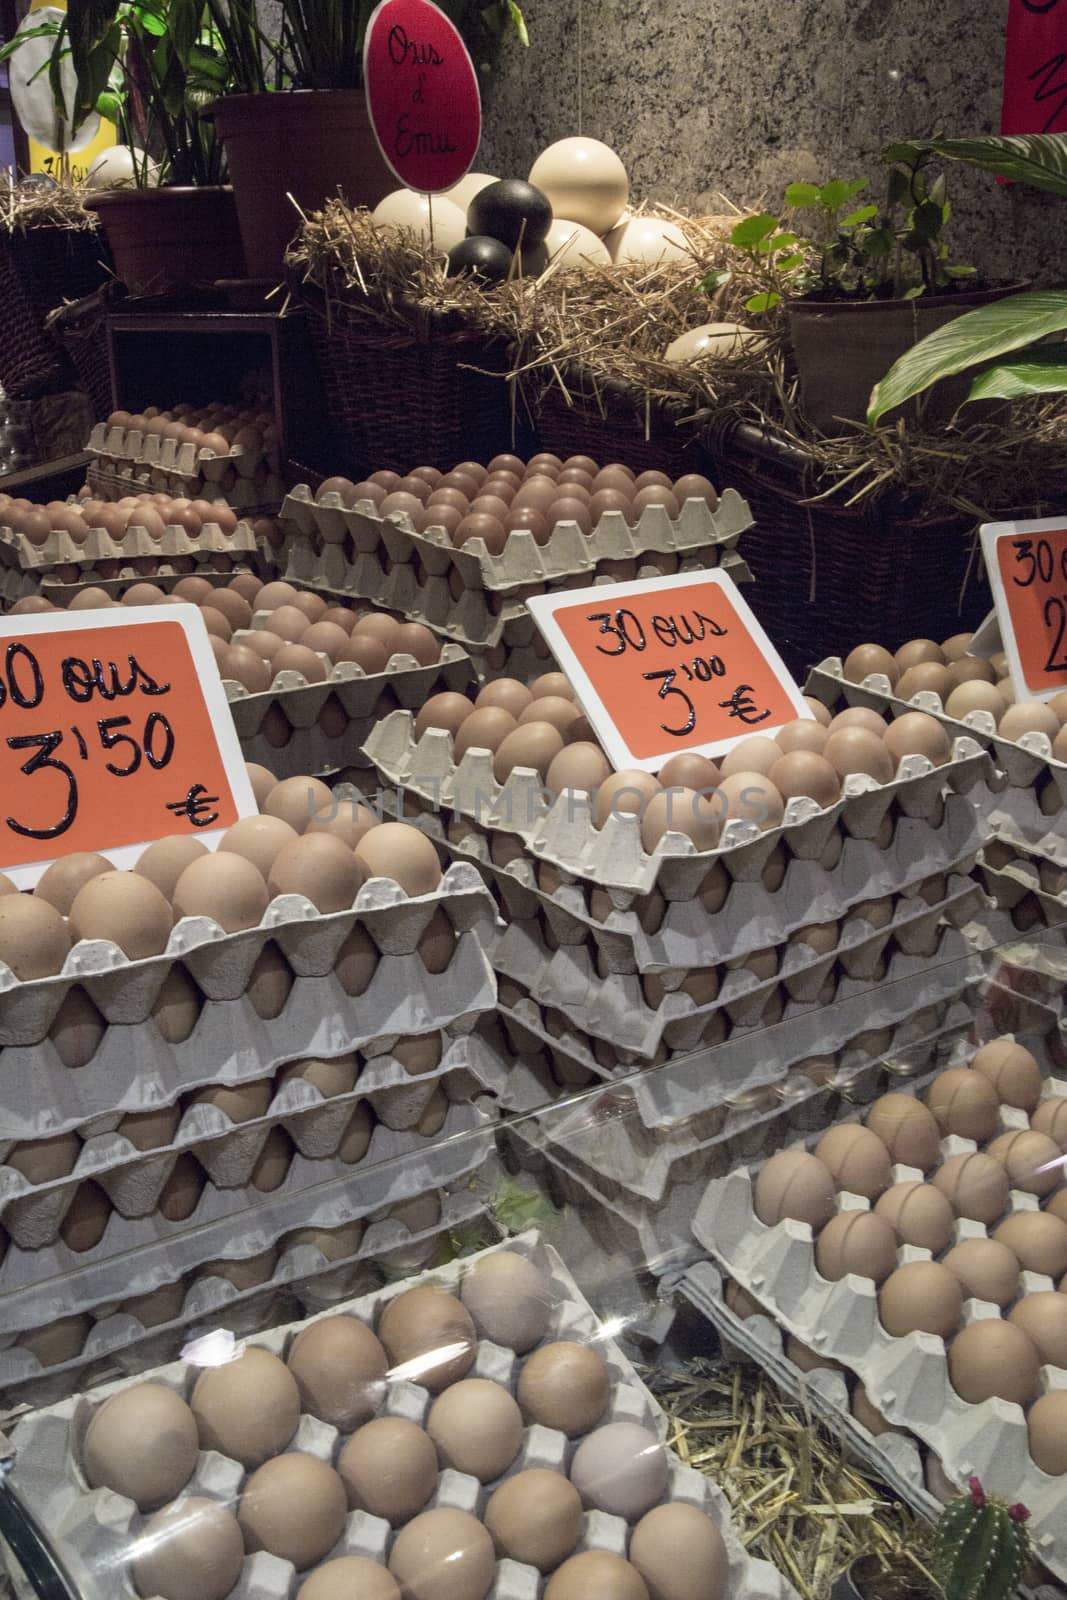 Eggs for sale by KylieEllway